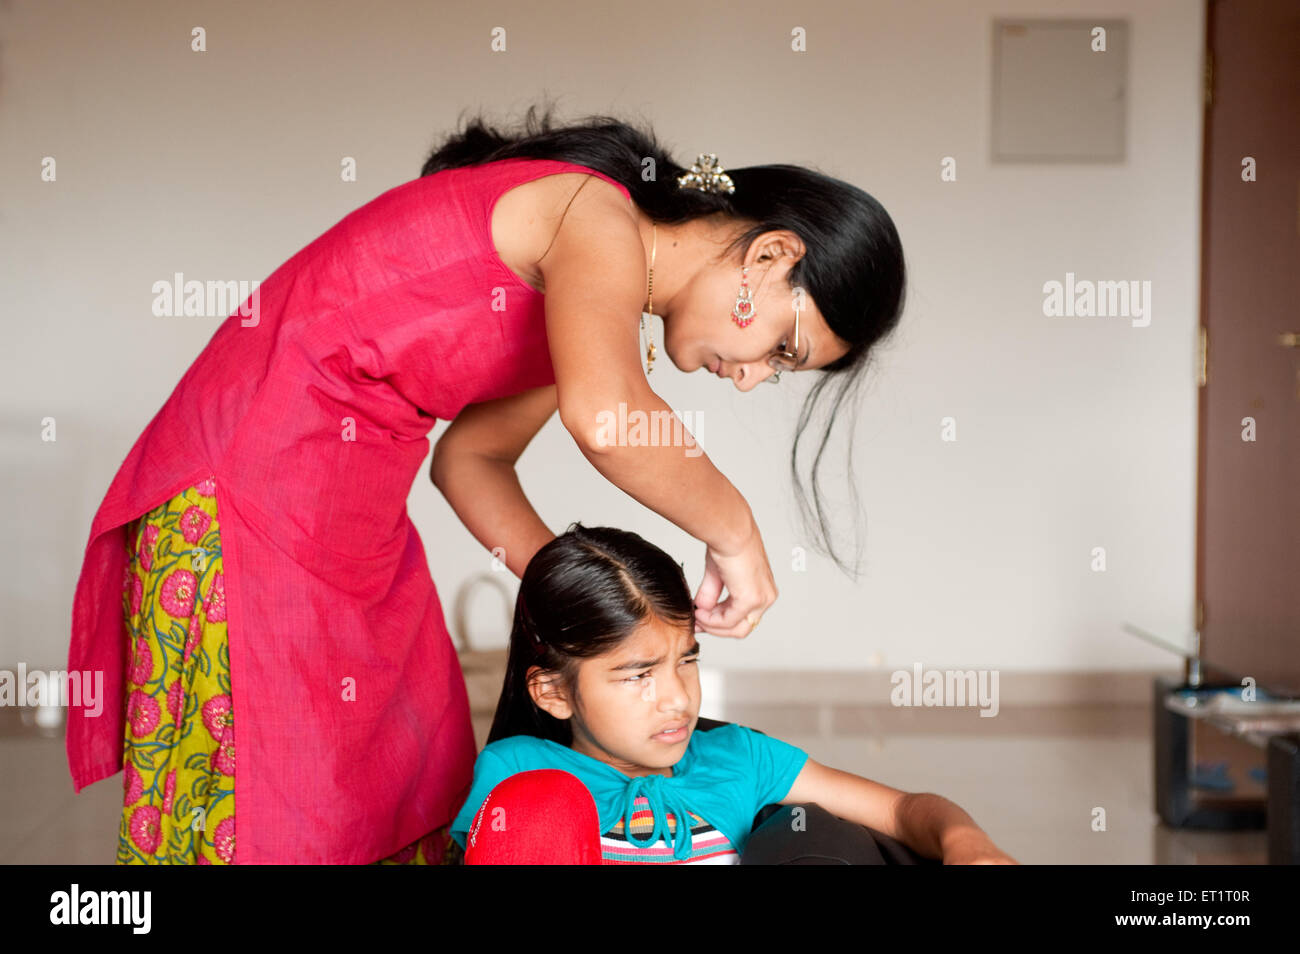 Mother combing hair of daughter MR#556 Stock Photo